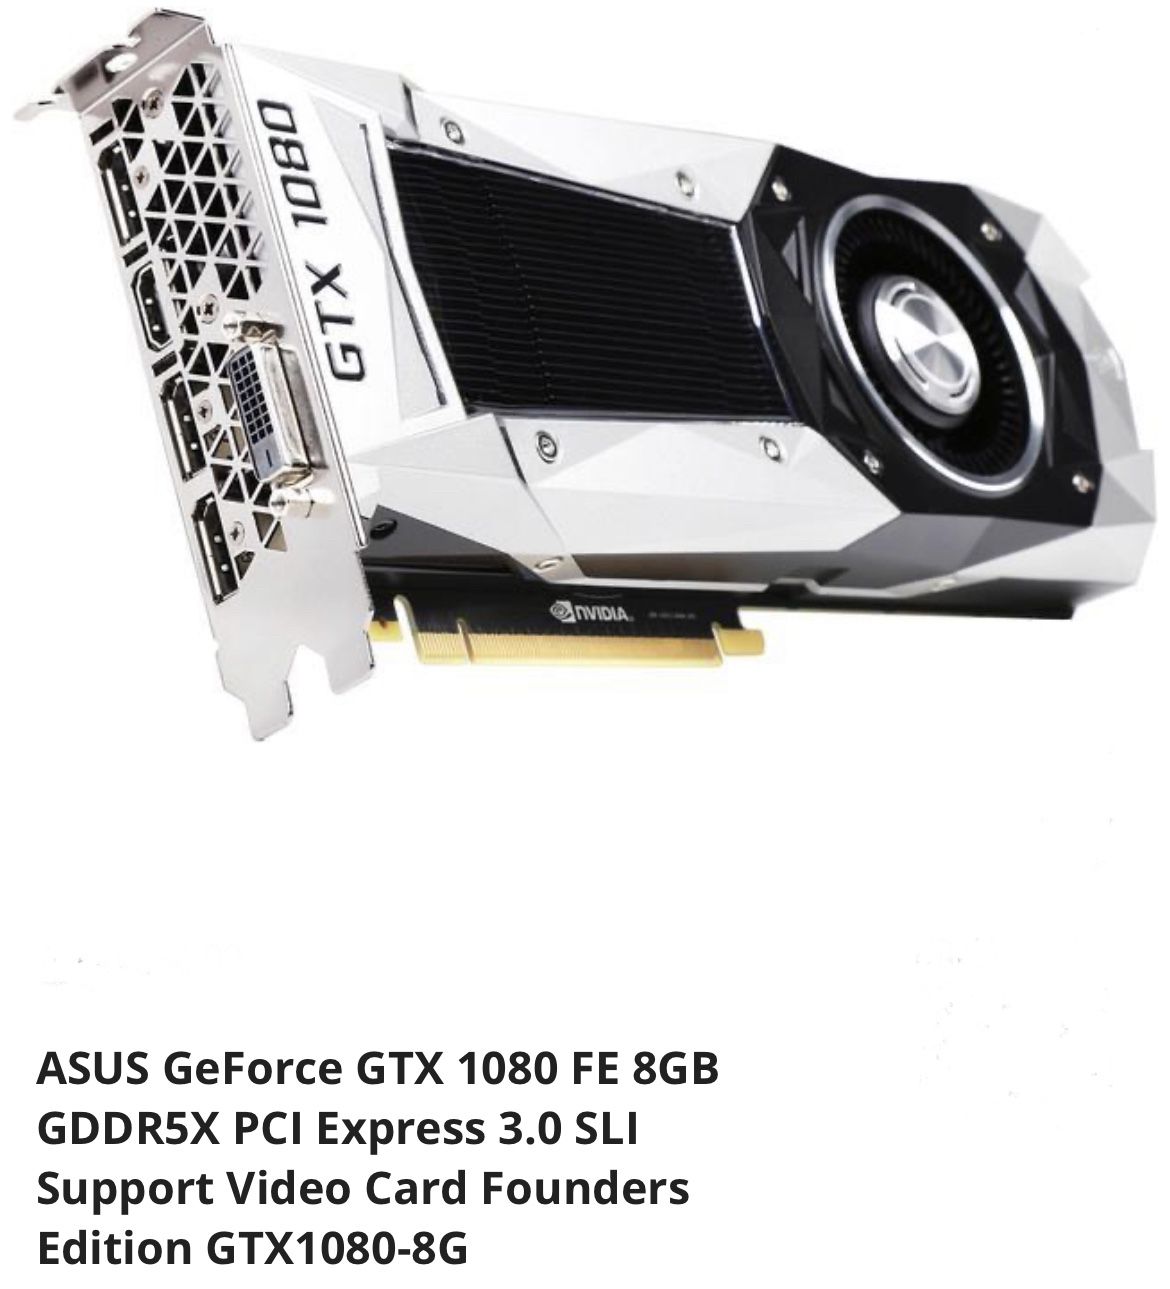 ASUS GTX1080 Founders Edition